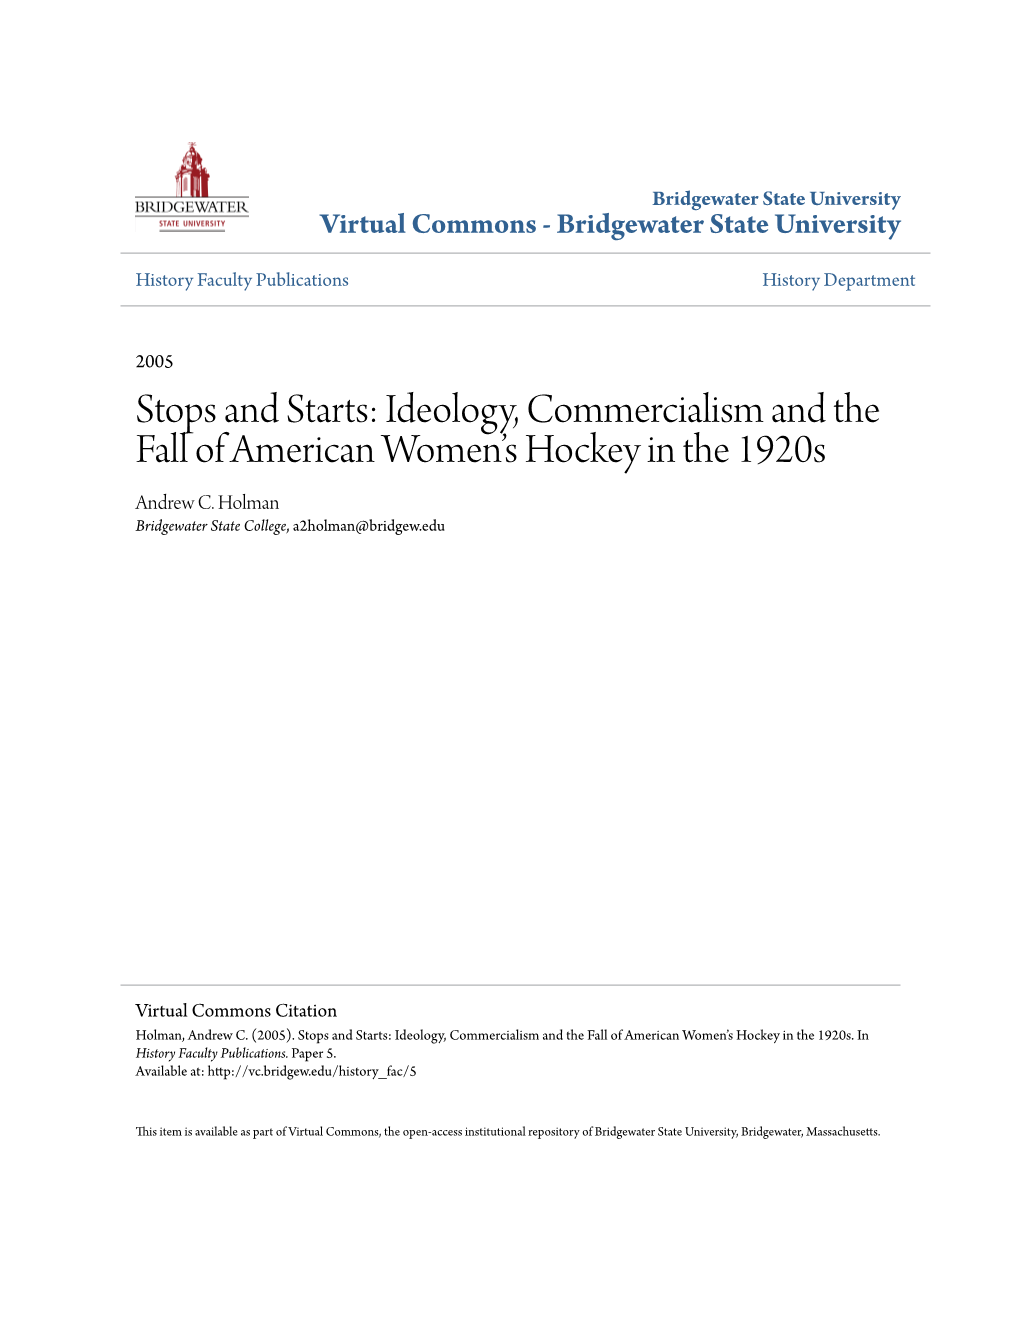 Stops and Starts: Ideology, Commercialism and the Fall of American Women’S Hockey in the 1920S Andrew C